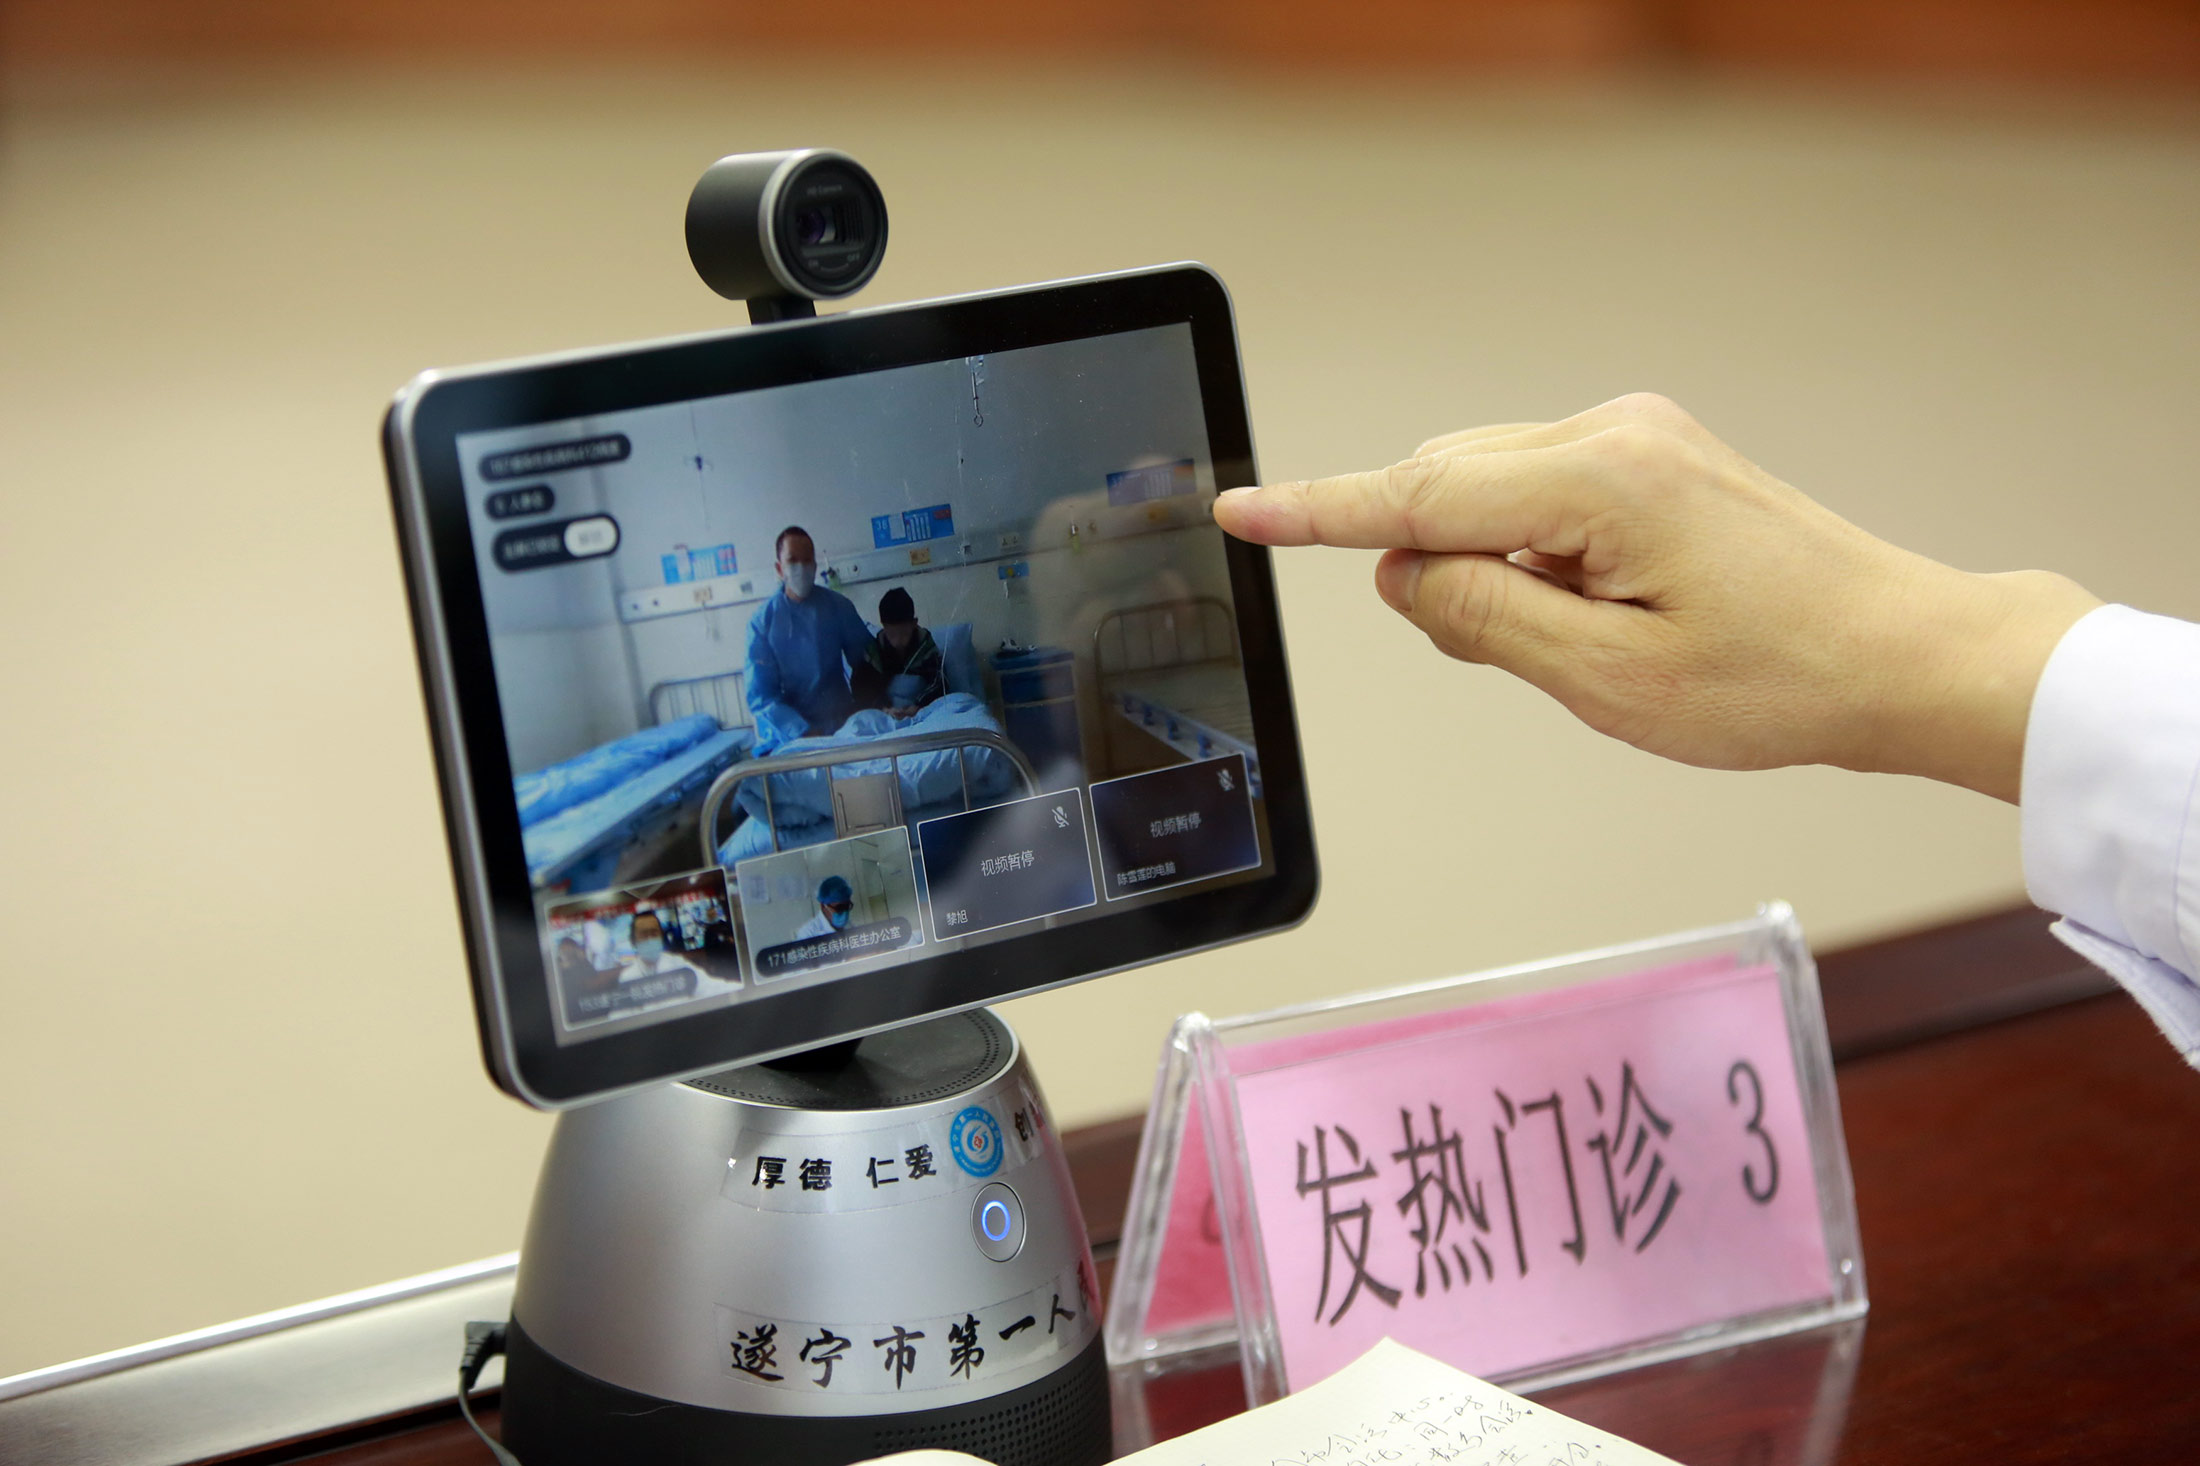 The doctors is holding the consultationare for patients with telemedicine platforms in Suining,Sichuan,China on 16th February, 2020